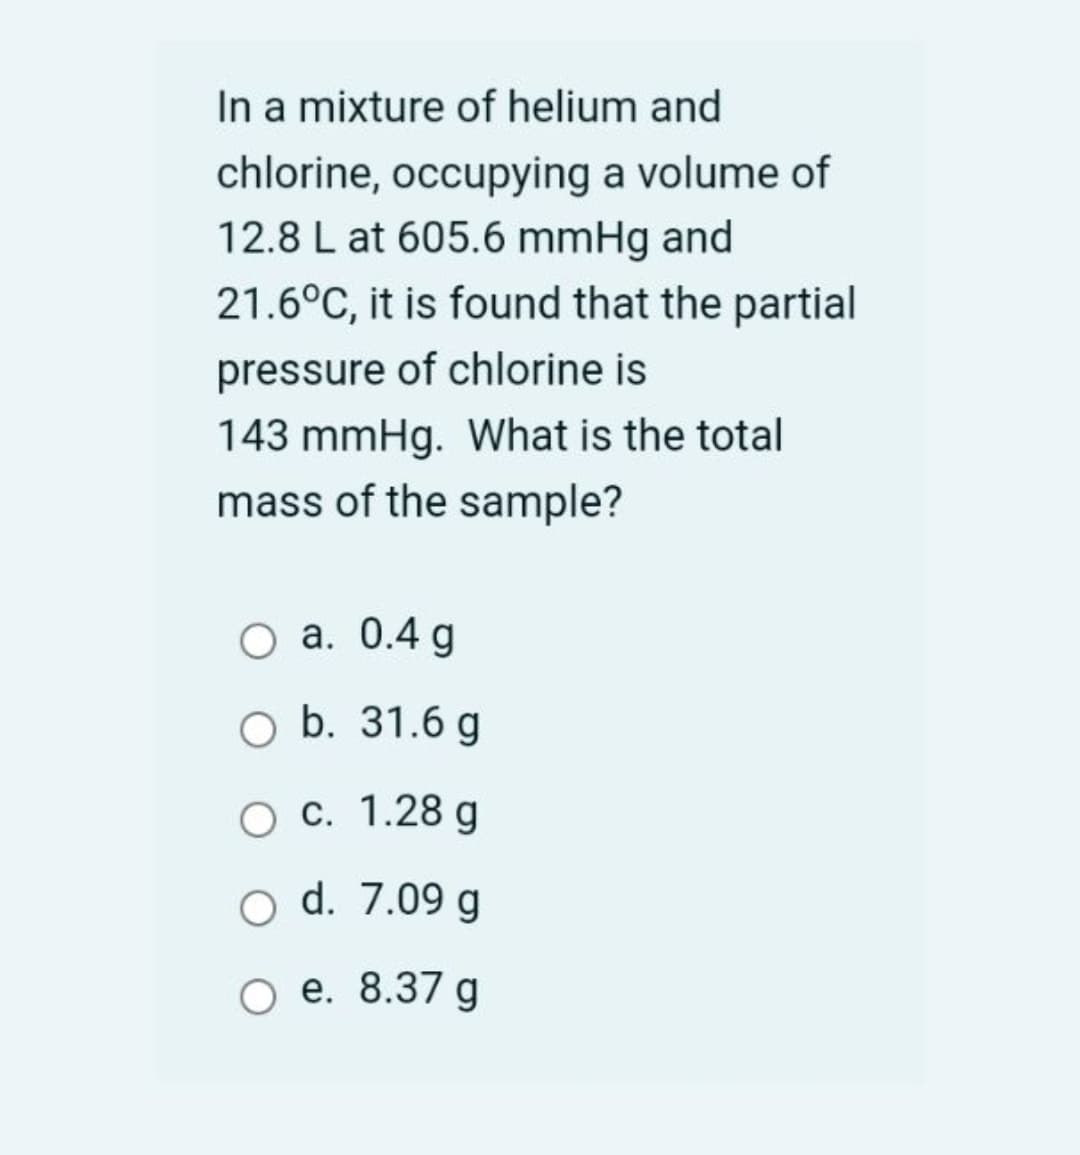 In a mixture of helium and
chlorine, occupying a volume of
12.8 L at 605.6 mmHg and
21.6°C, it is found that the partial
pressure of chlorine is
143 mmHg. What is the total
mass of the sample?
a. 0.4 g
O b. 31.6 g
Ос. 1.28 g
d. 7.09 g
ое. 8.37 g
